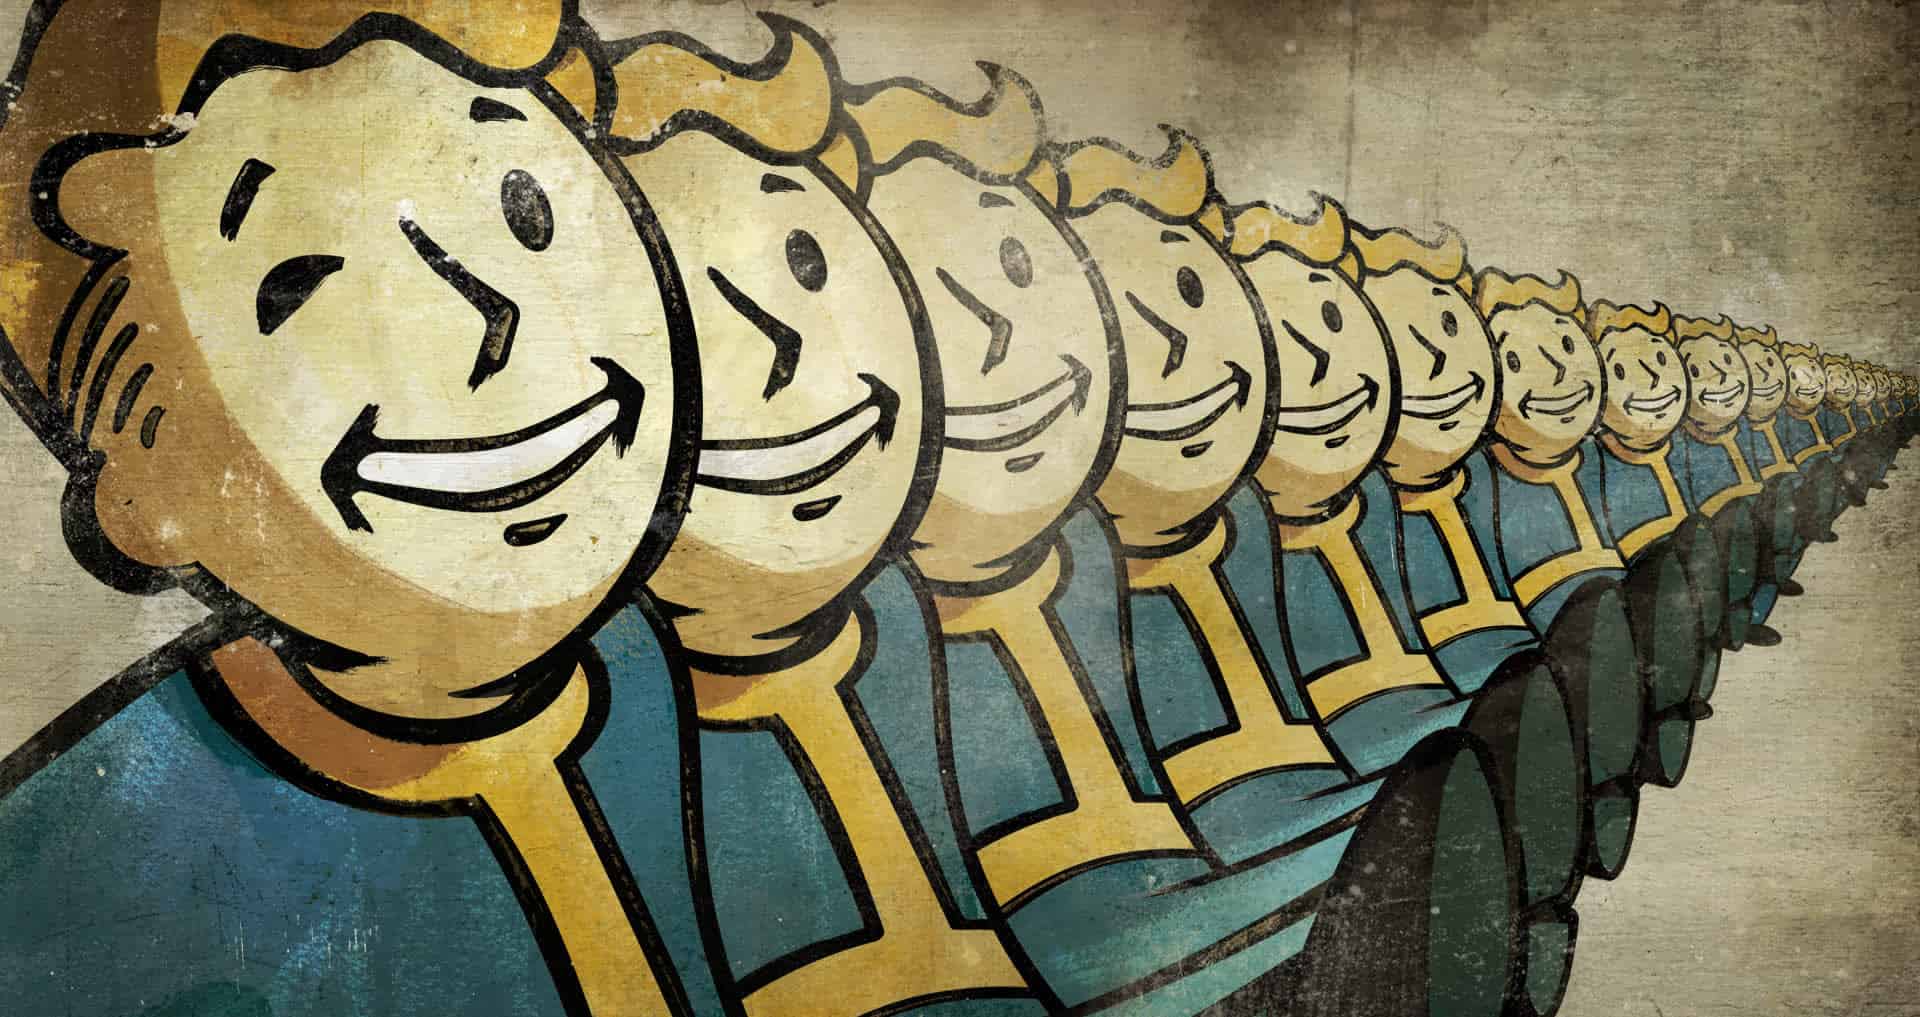 A kickline composed of the Fallout mascot Vault Boy